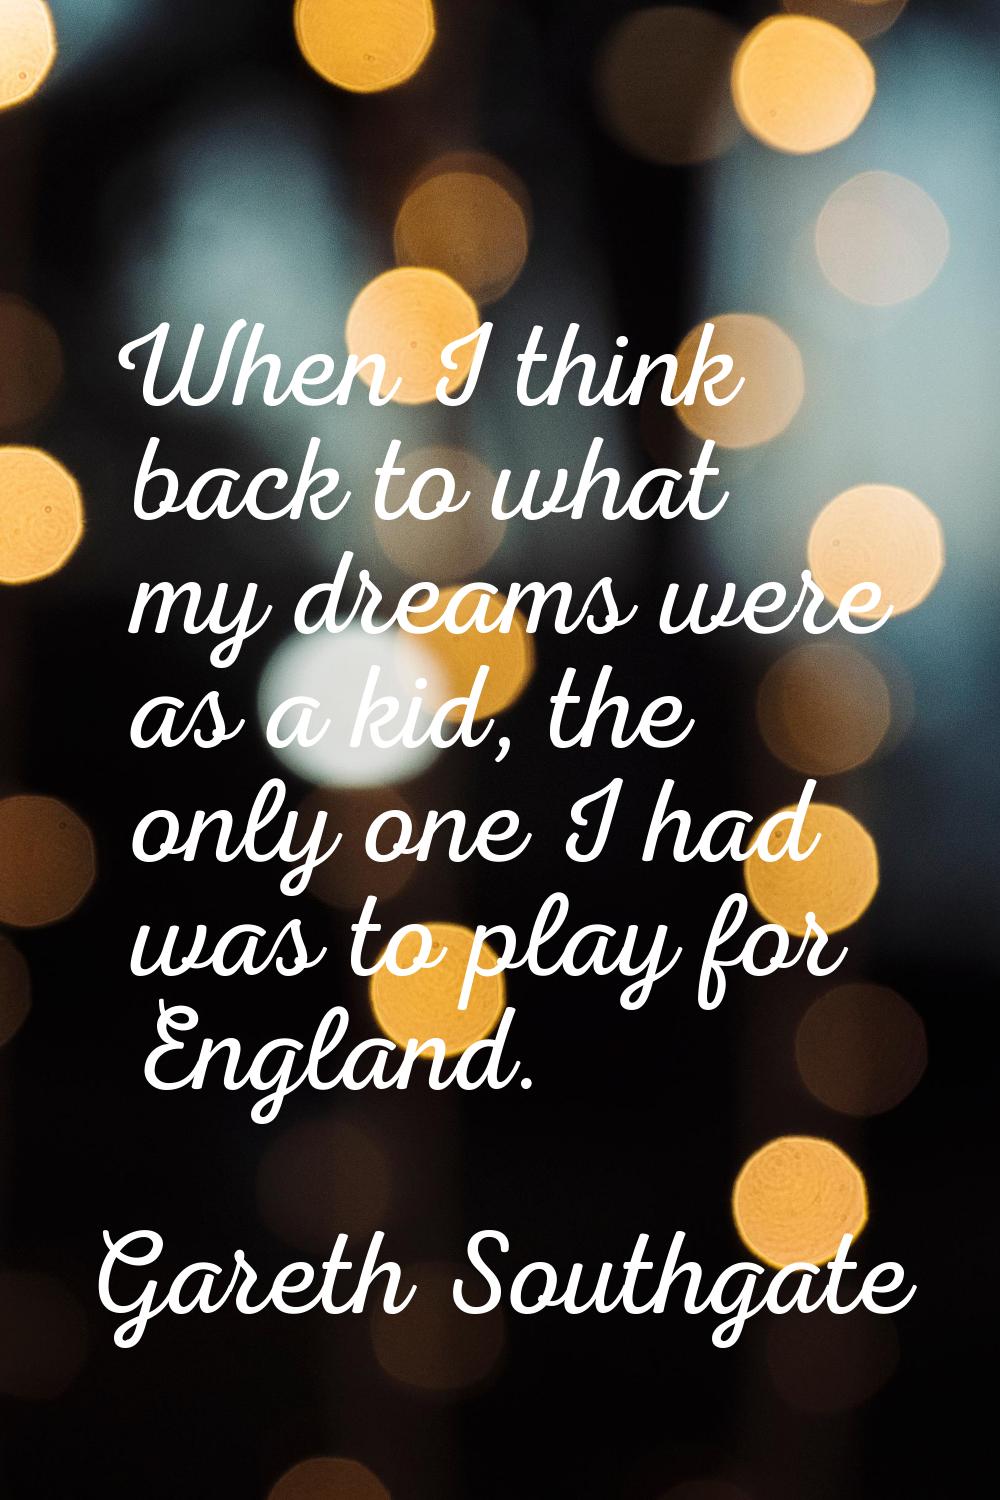 When I think back to what my dreams were as a kid, the only one I had was to play for England.